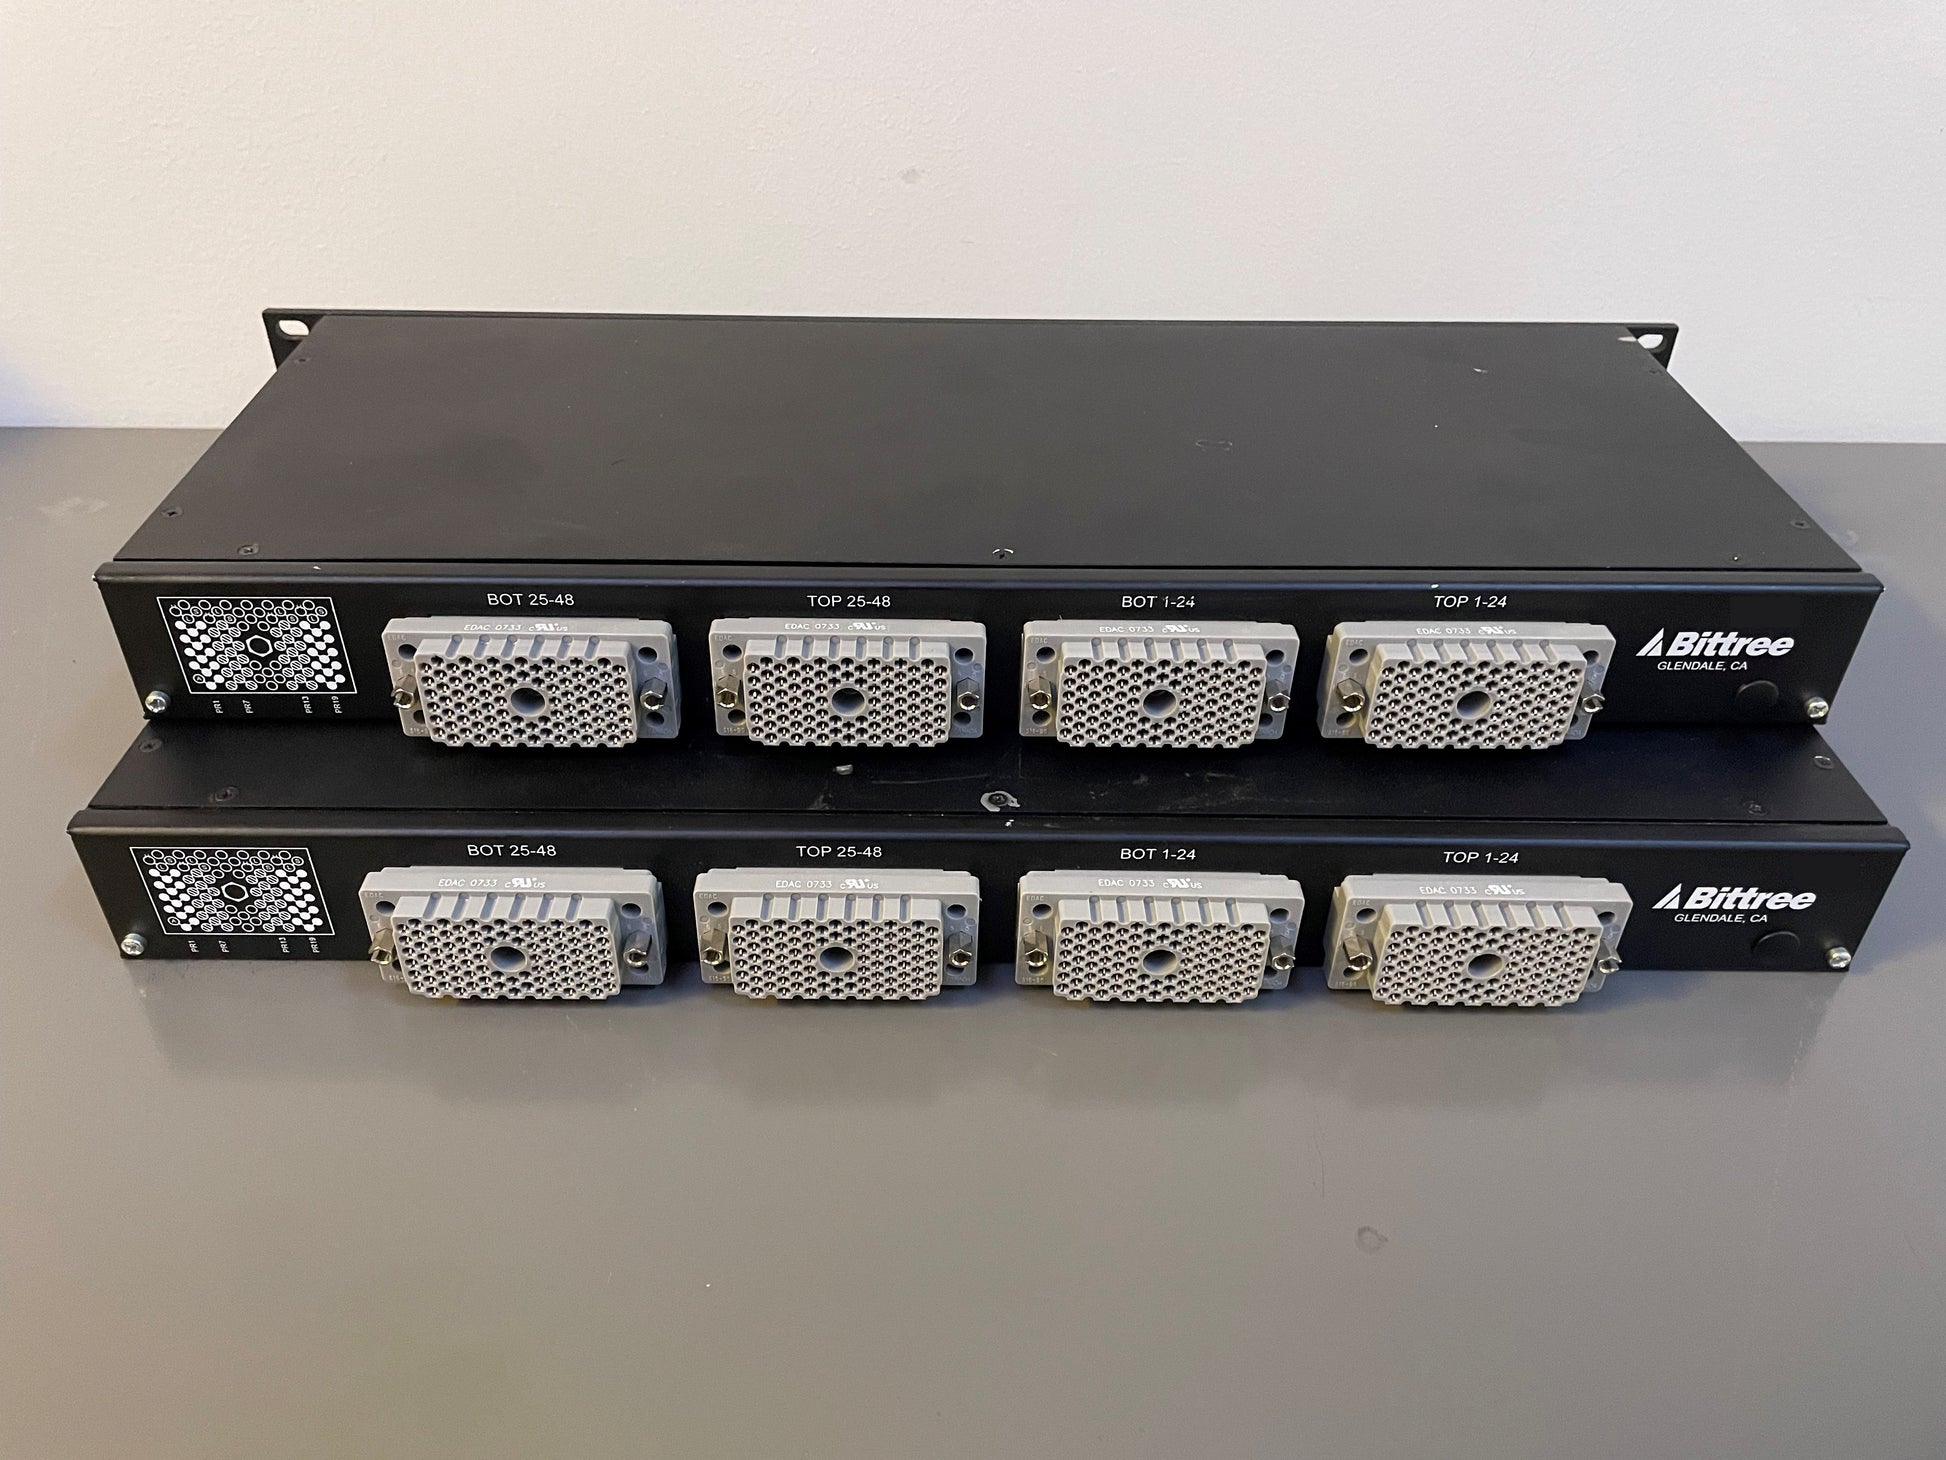 Bittree TT Patchbay w/EDAC90 Rear Connectors, Lot of Two (2). We Sell Professional Audio Equipment. Audio Systems, Amplifiers, Consoles, Mixers, Electronics, Entertainment, Sound, Live.